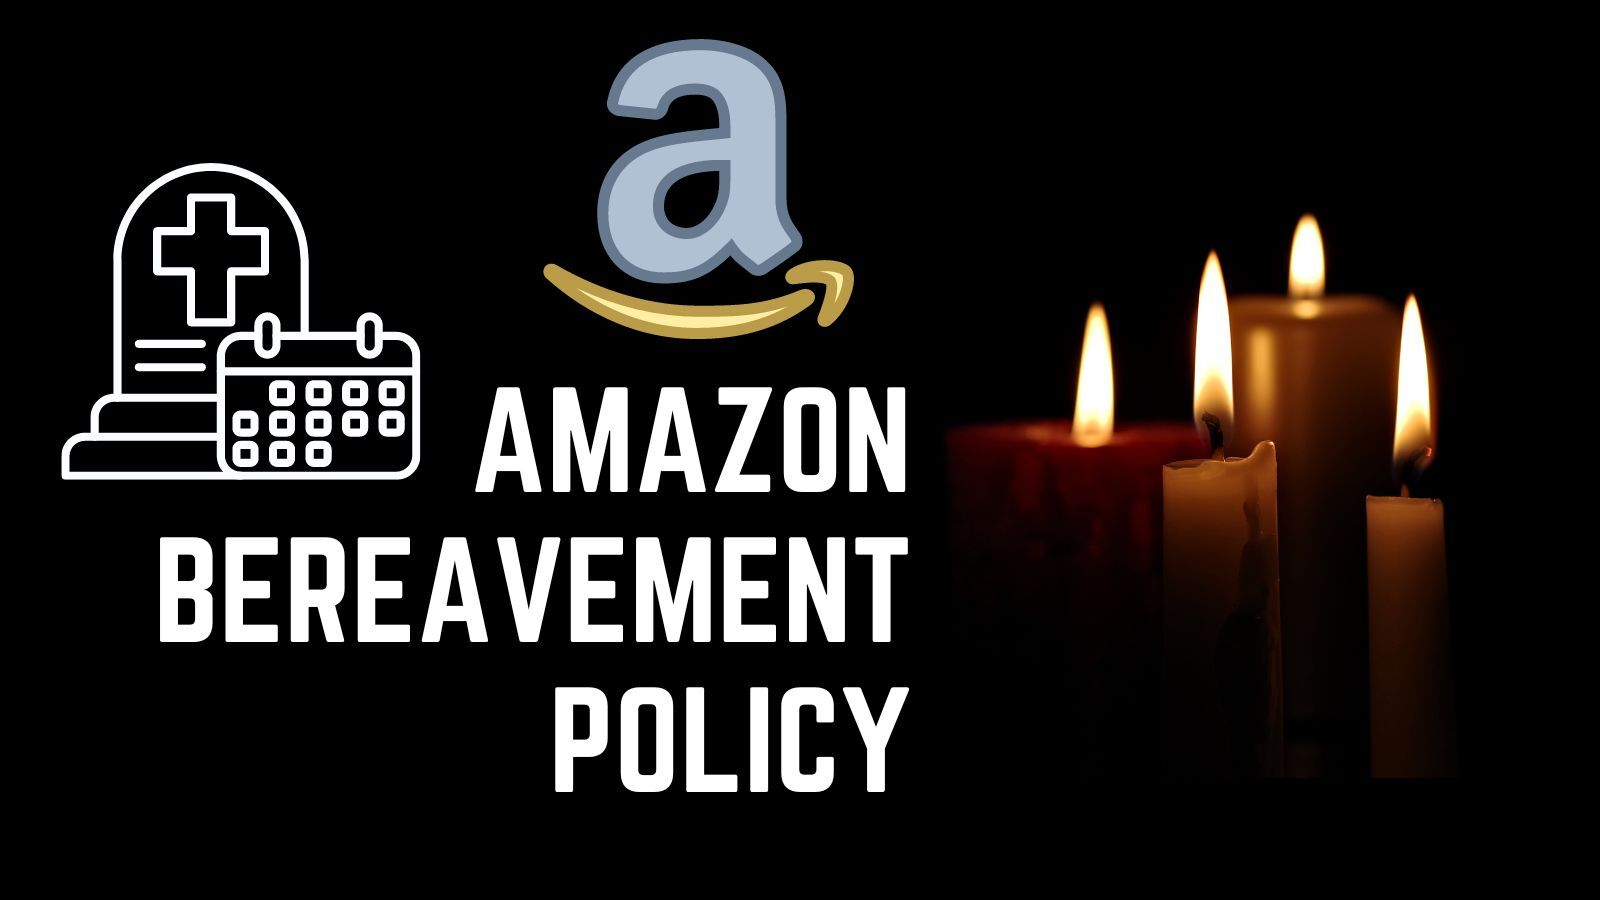 Amazon Bereavement Policy (Things You Need to Know)